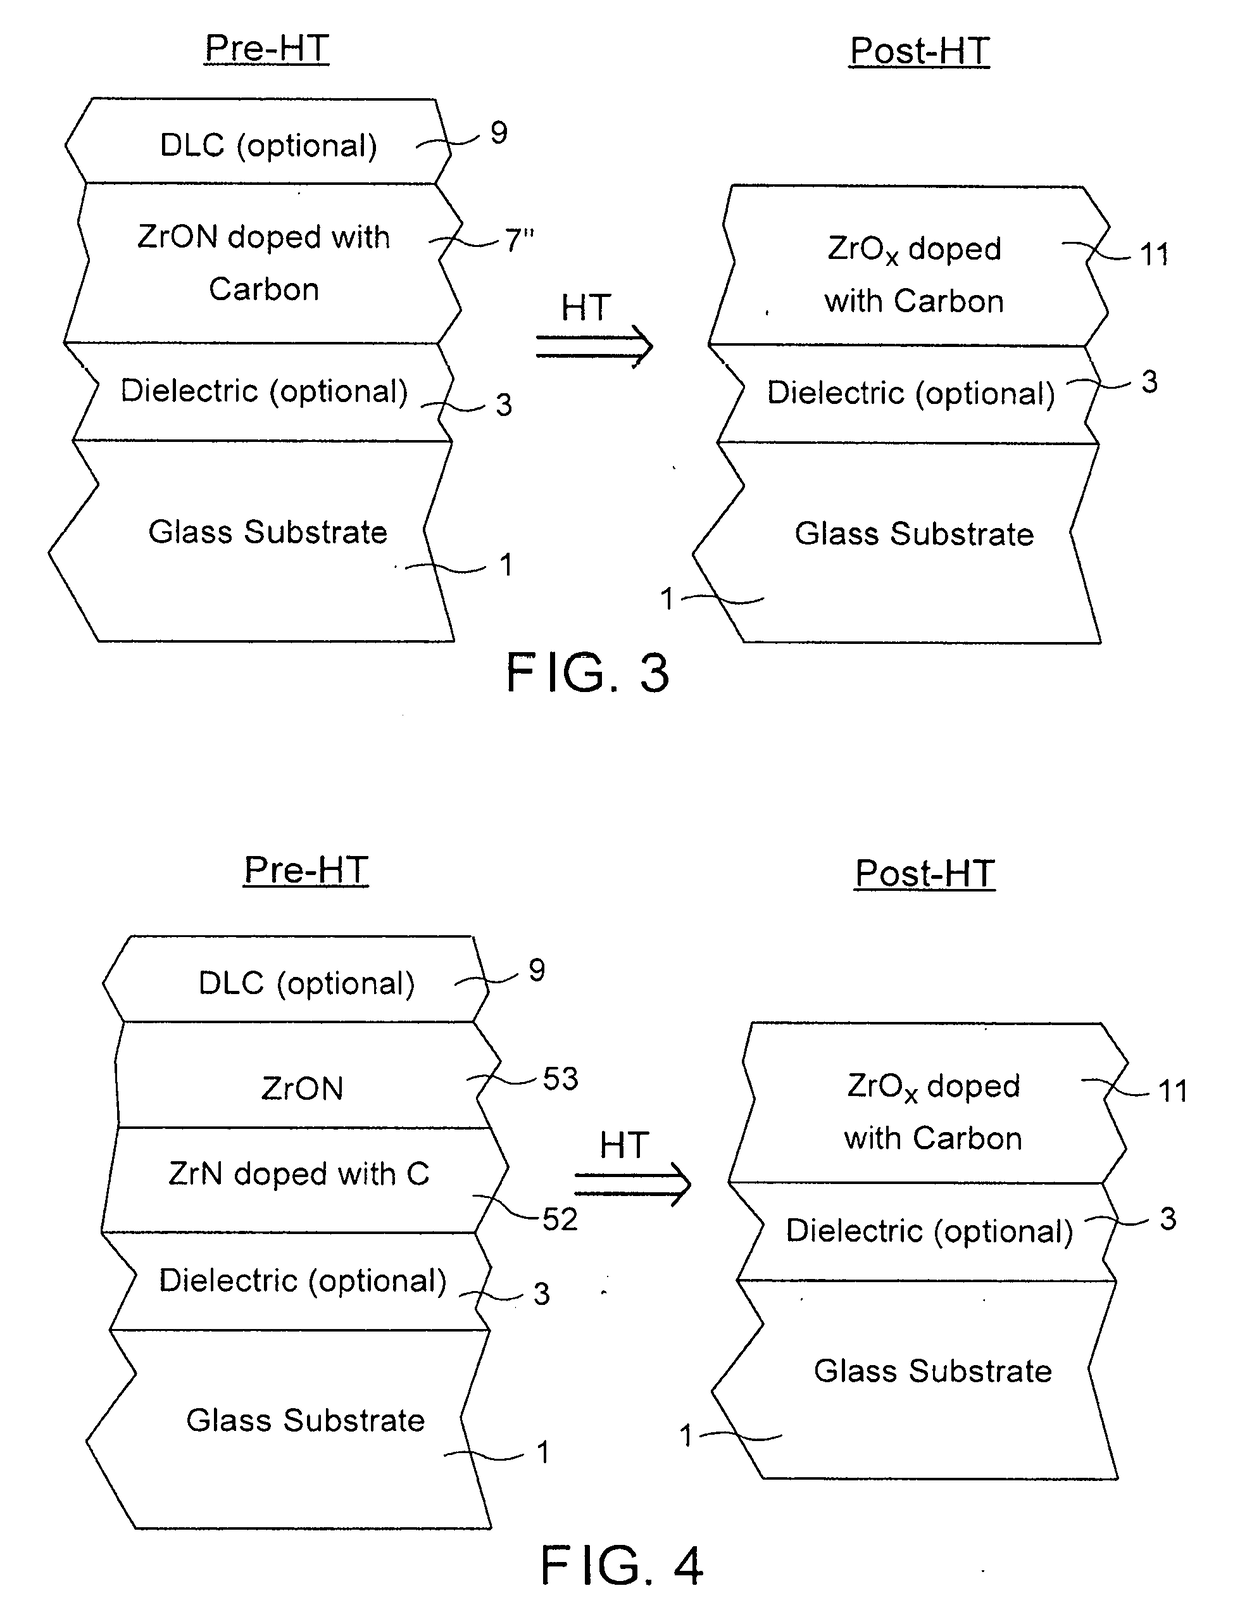 Heat treatable coated article with carbon-doped zirconium based layer(s) in coating